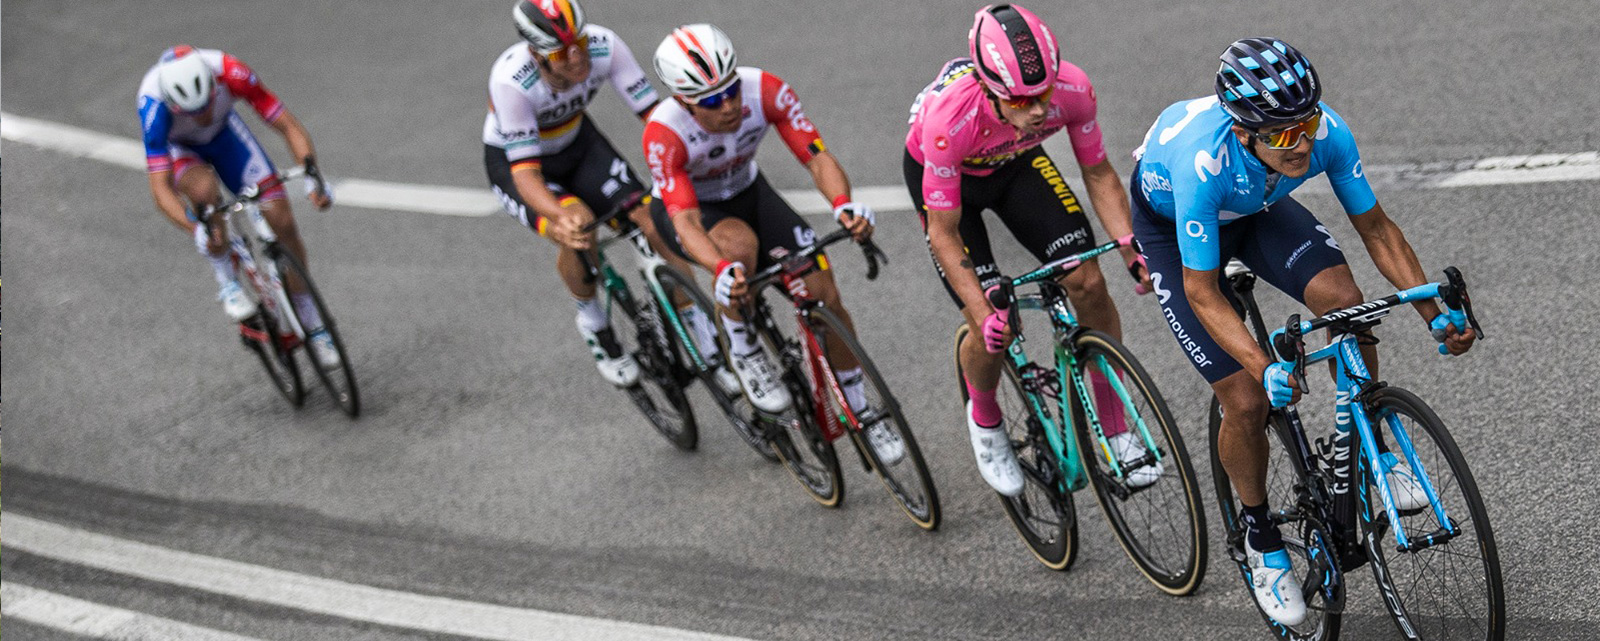 Carapaz wins stage 4 at Giro d'Italia